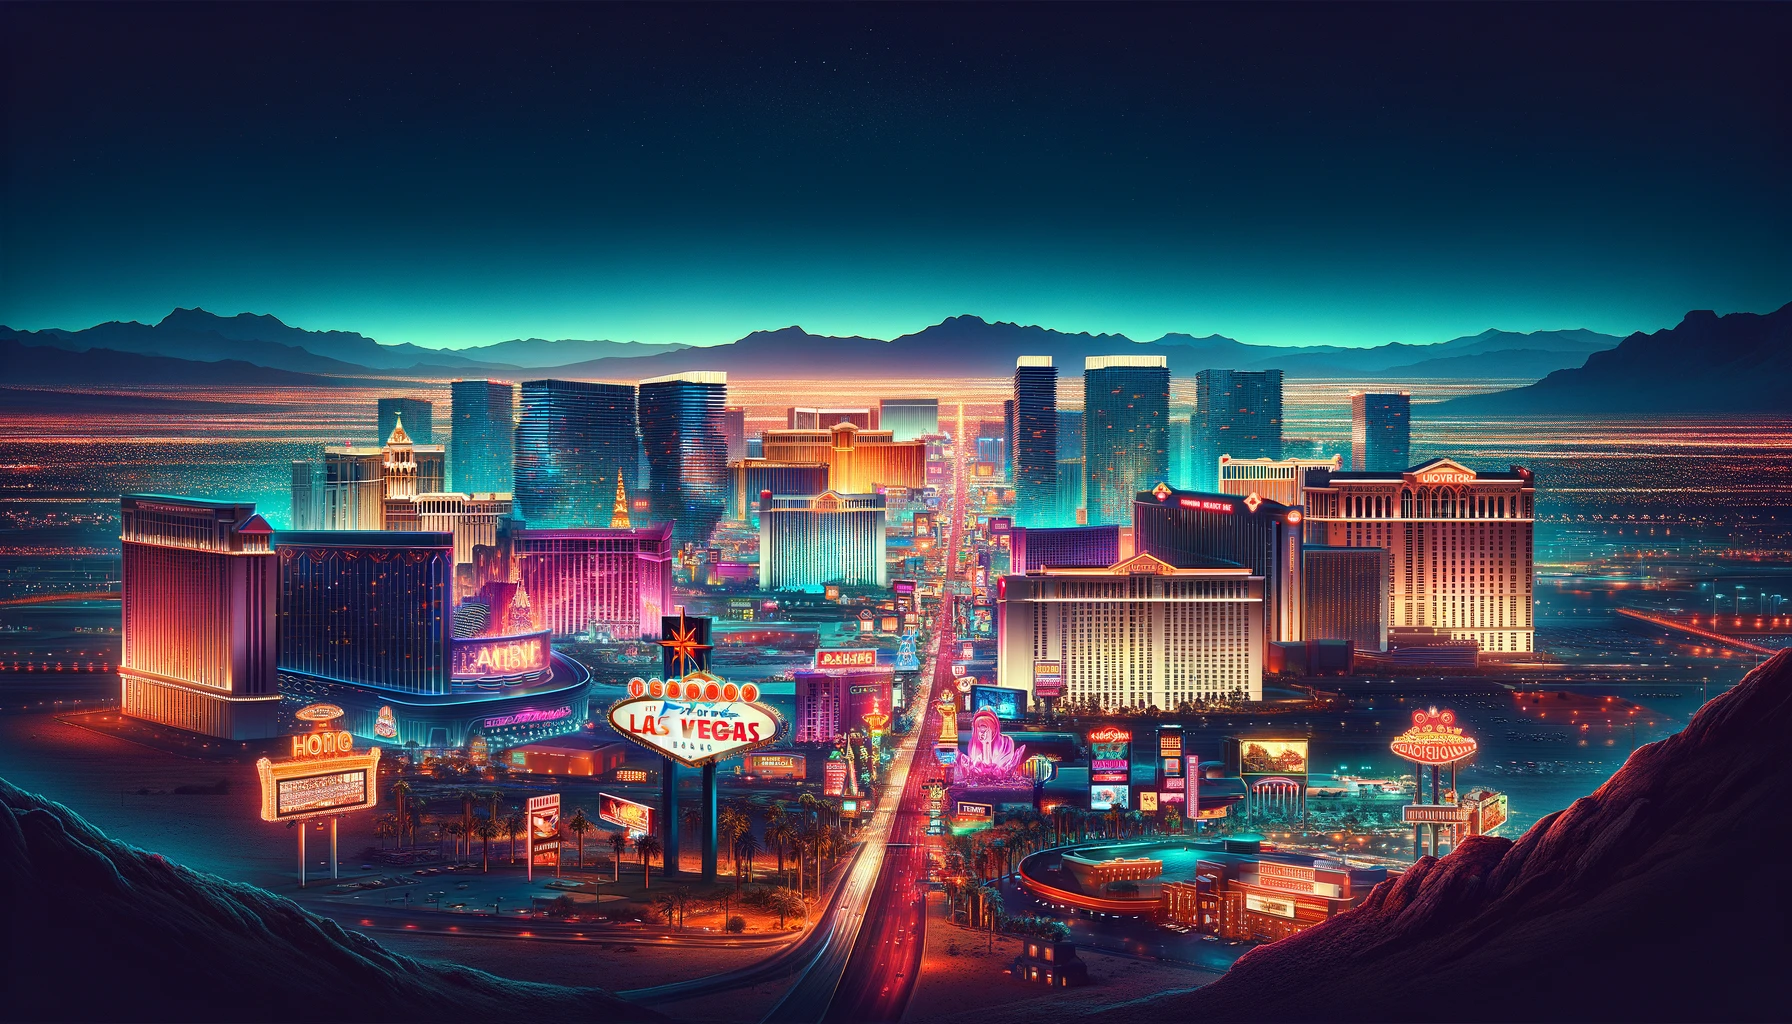 Las Vegas at night showcasing its vibrant neon-lit skyline, a symbol of its evolution from a desert to the entertainment capital